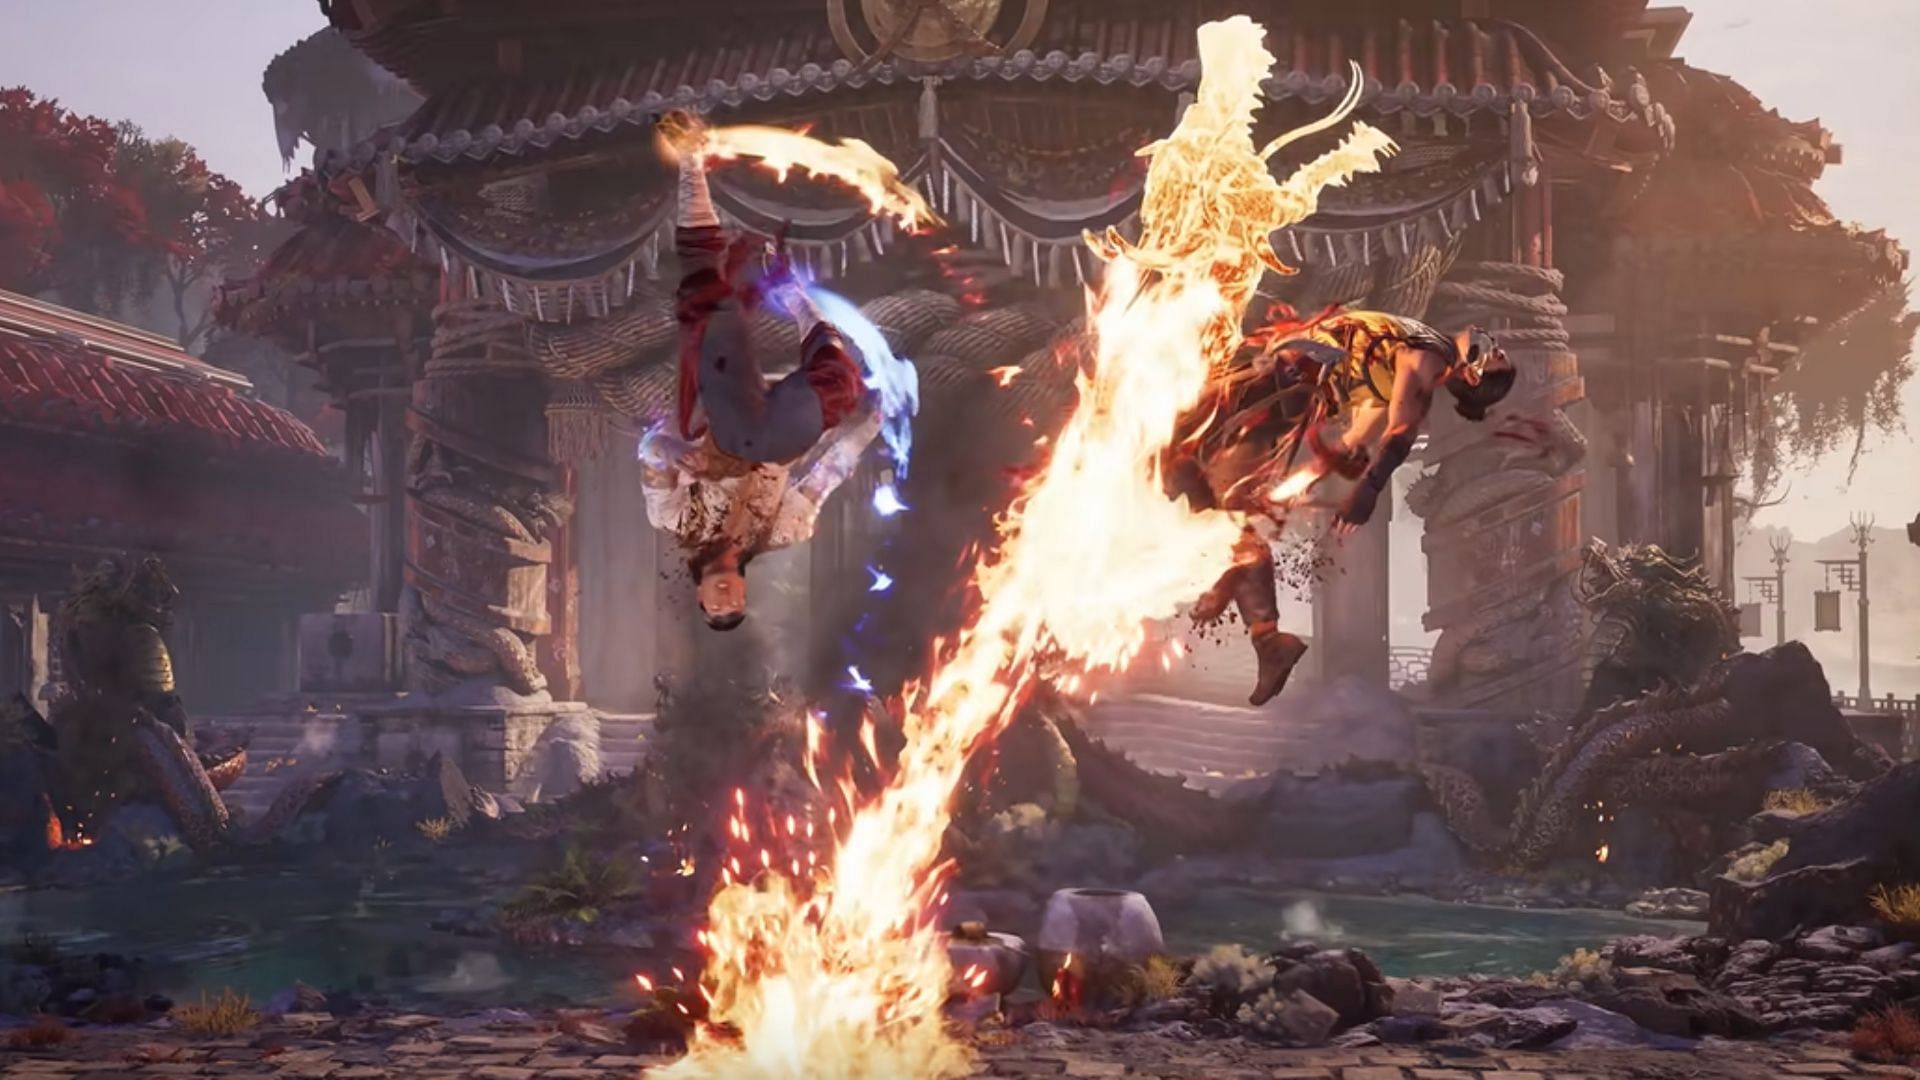 Digital Foundry's Mortal Kombat 1 tech breakdown details how well the  stress test ran and uses Unreal Engine 4